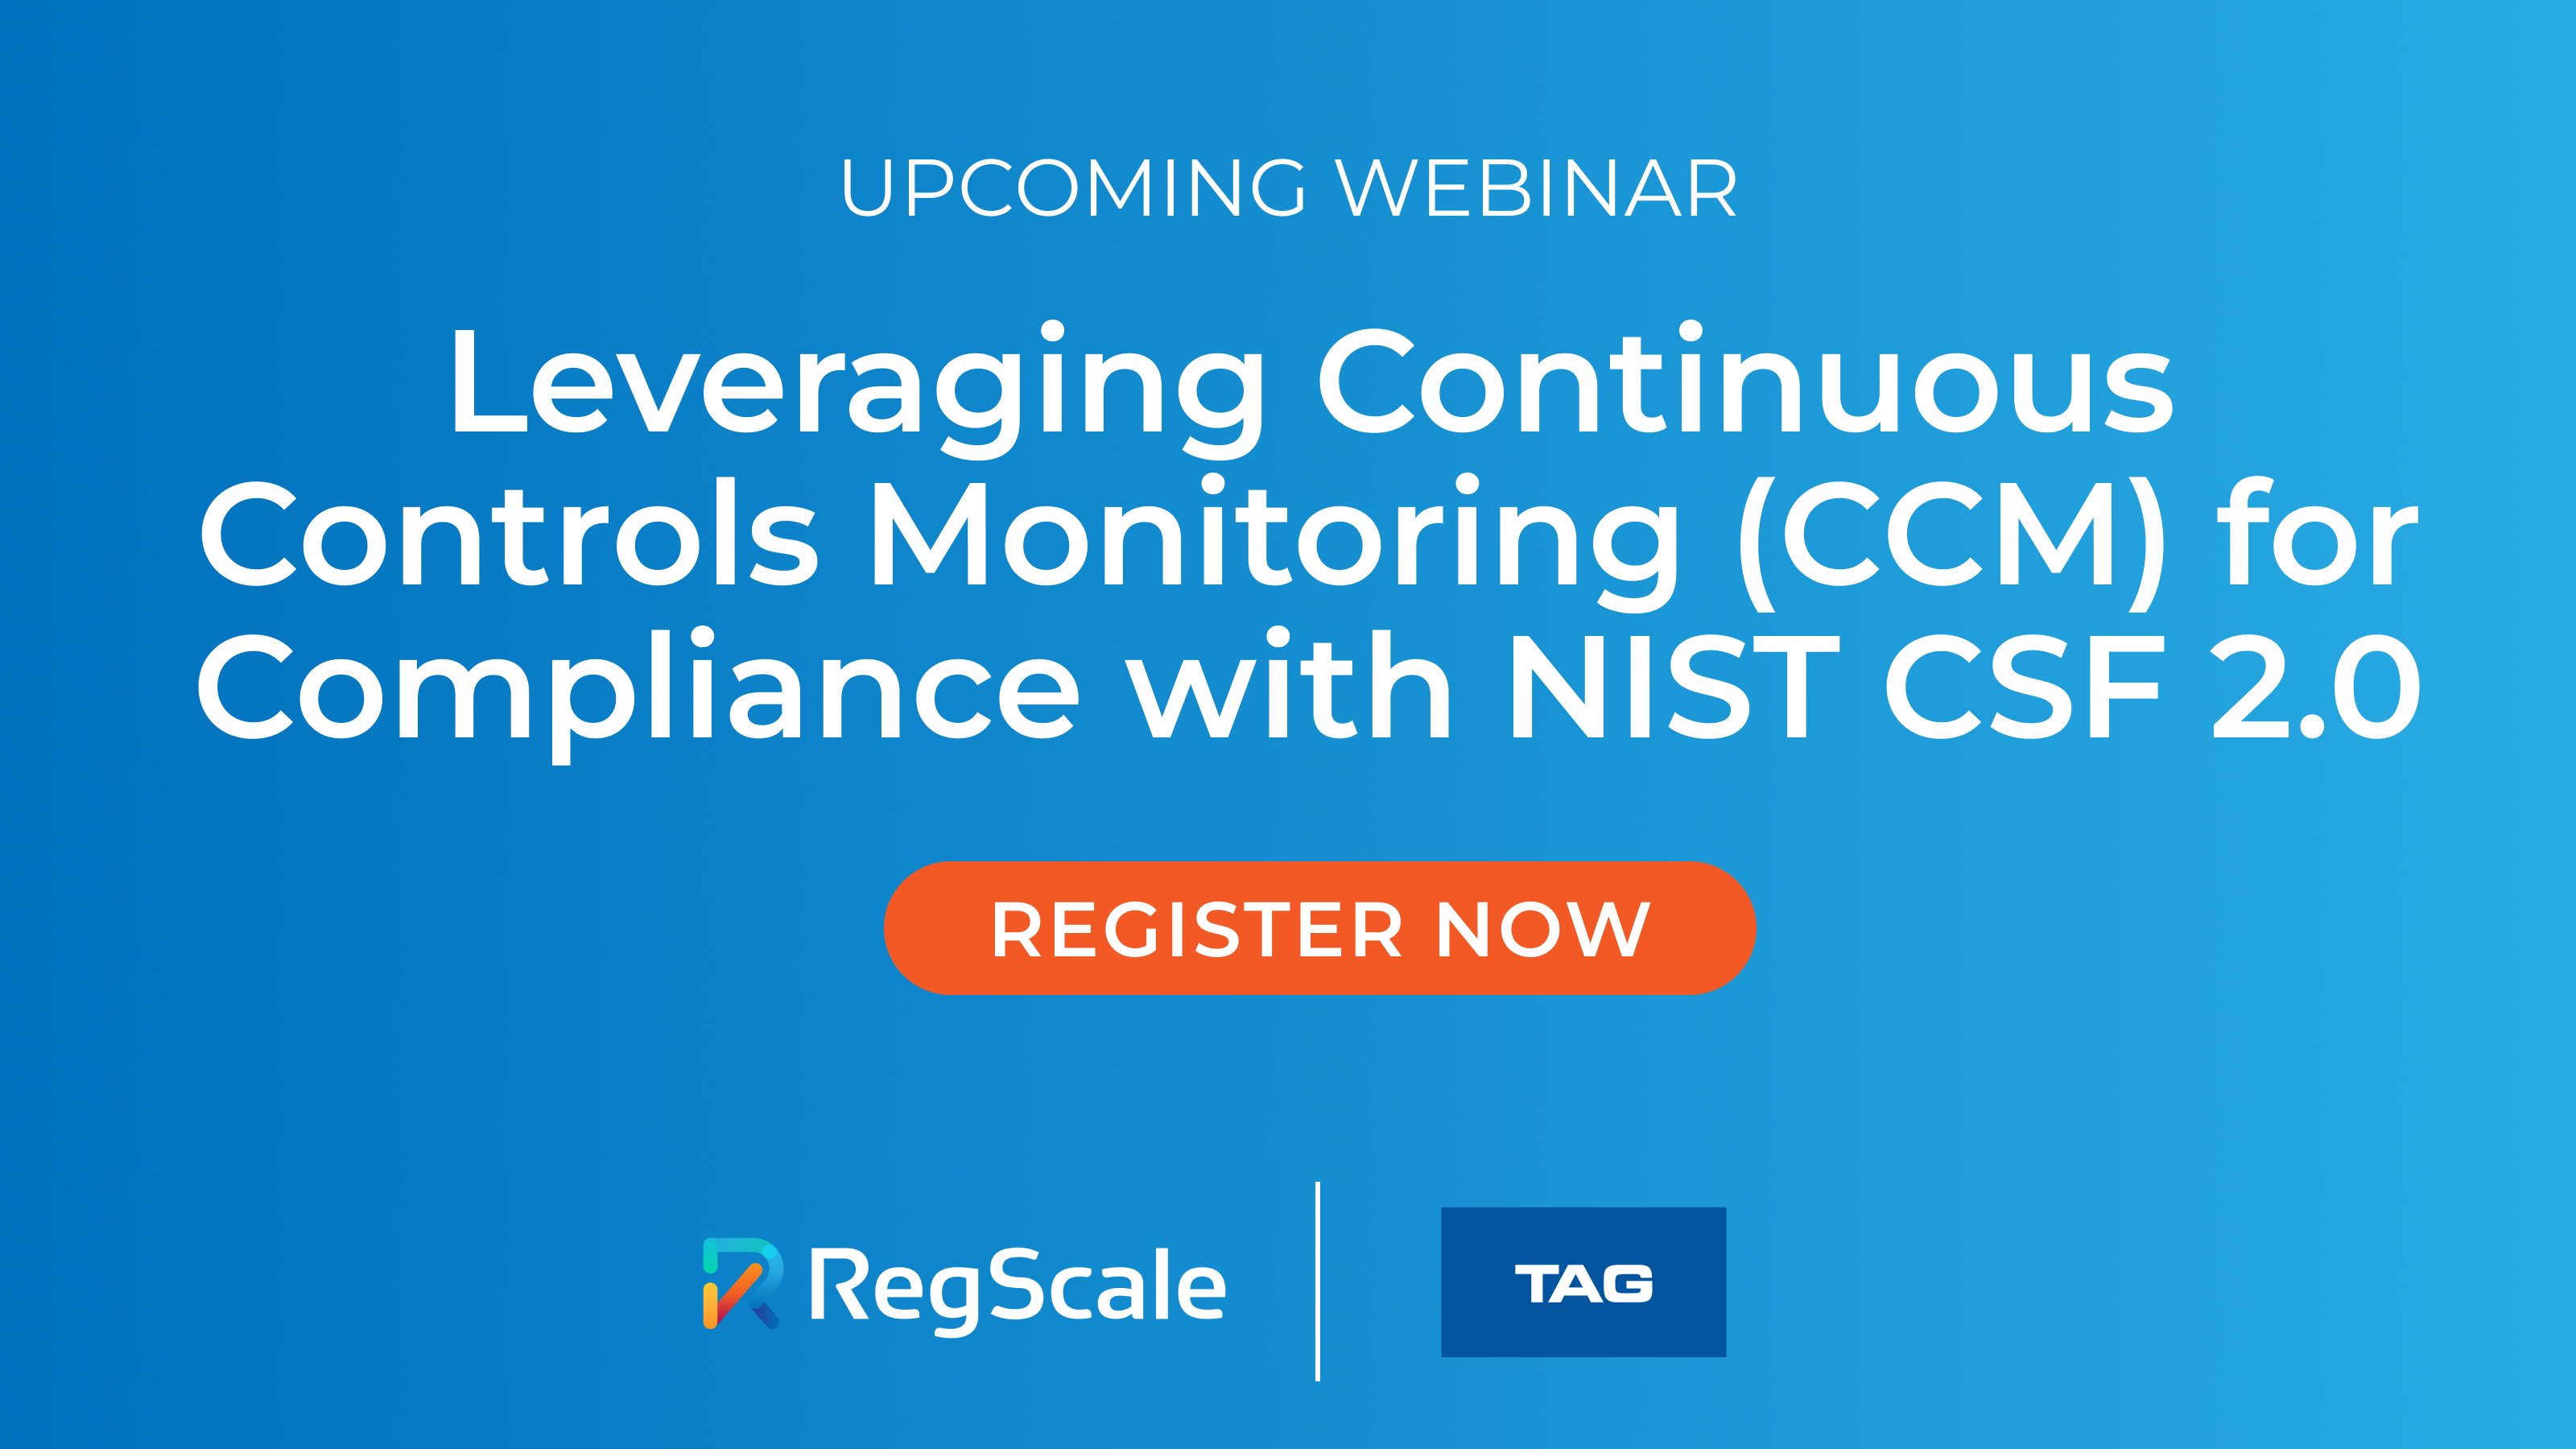 Leveraging Continuous Controls Monitoring (CCM) for Compliance with NIST CSF 2.0